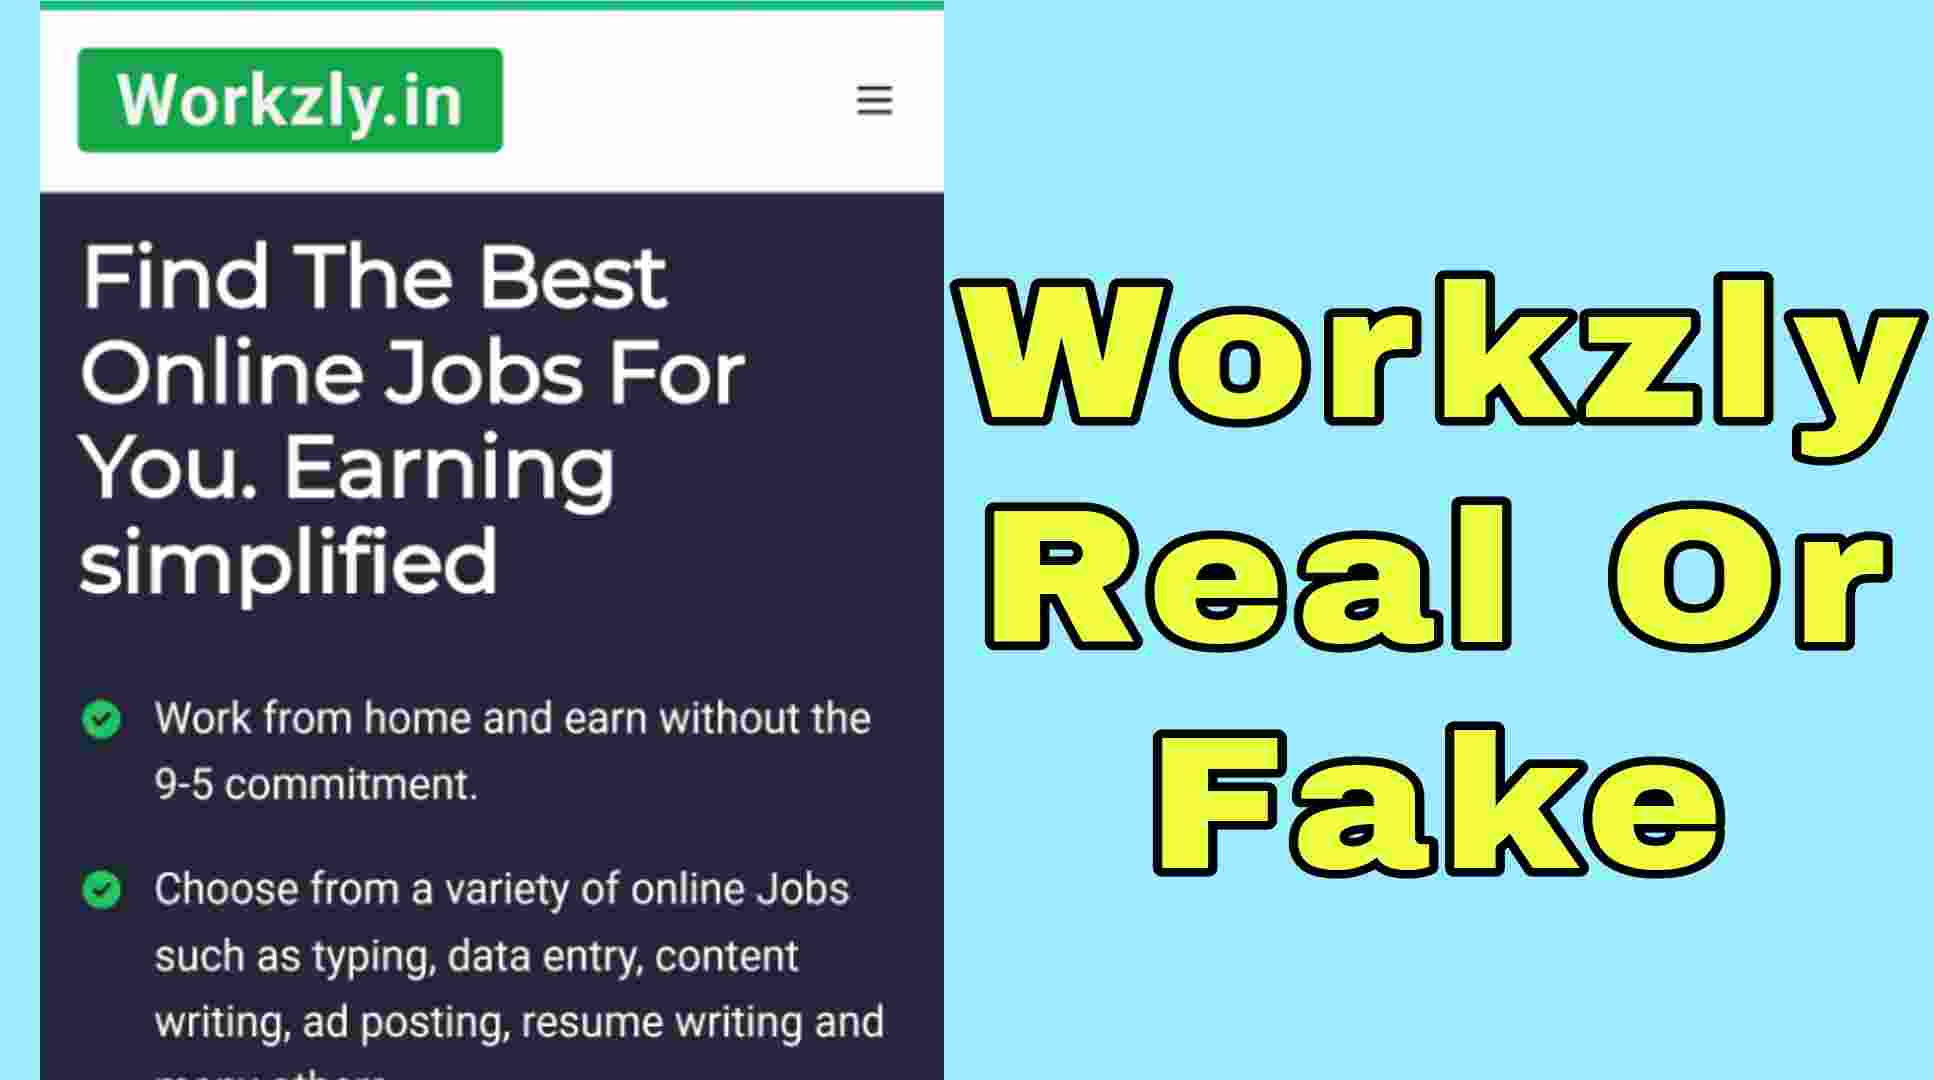 Workzly Real Or Fake